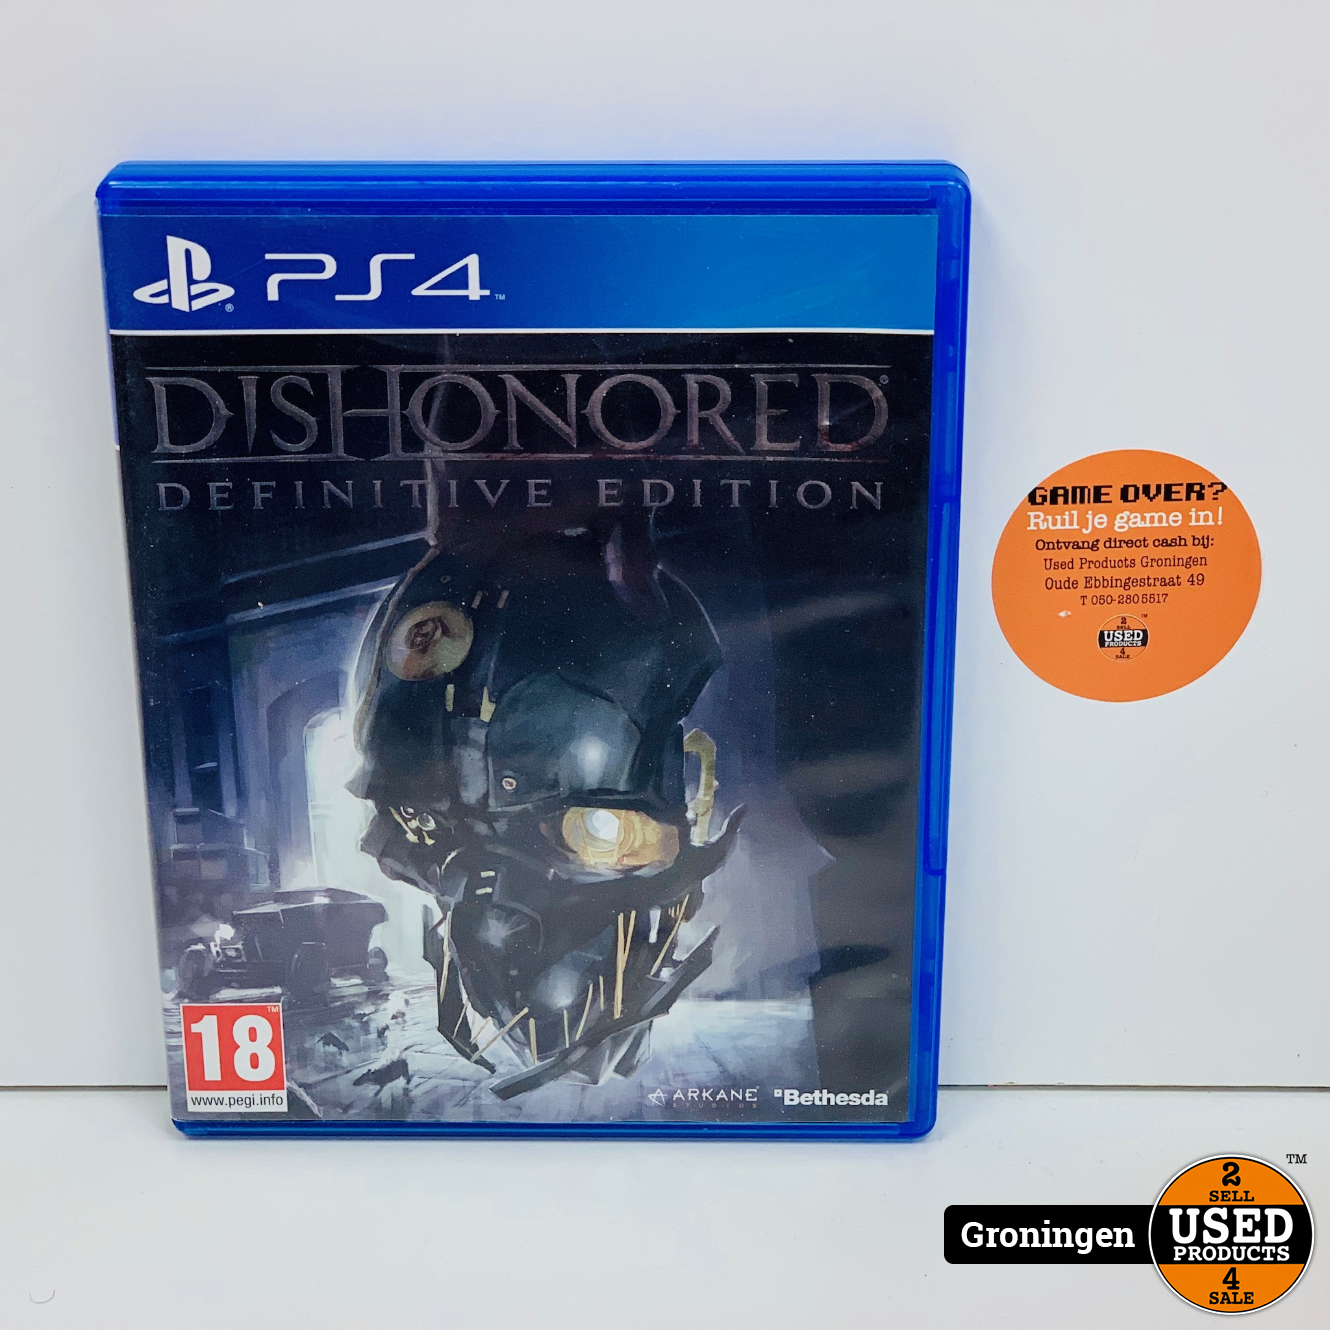 Playstation 4 Ps4 Dishonored Definitive Edition Used Products Groningen